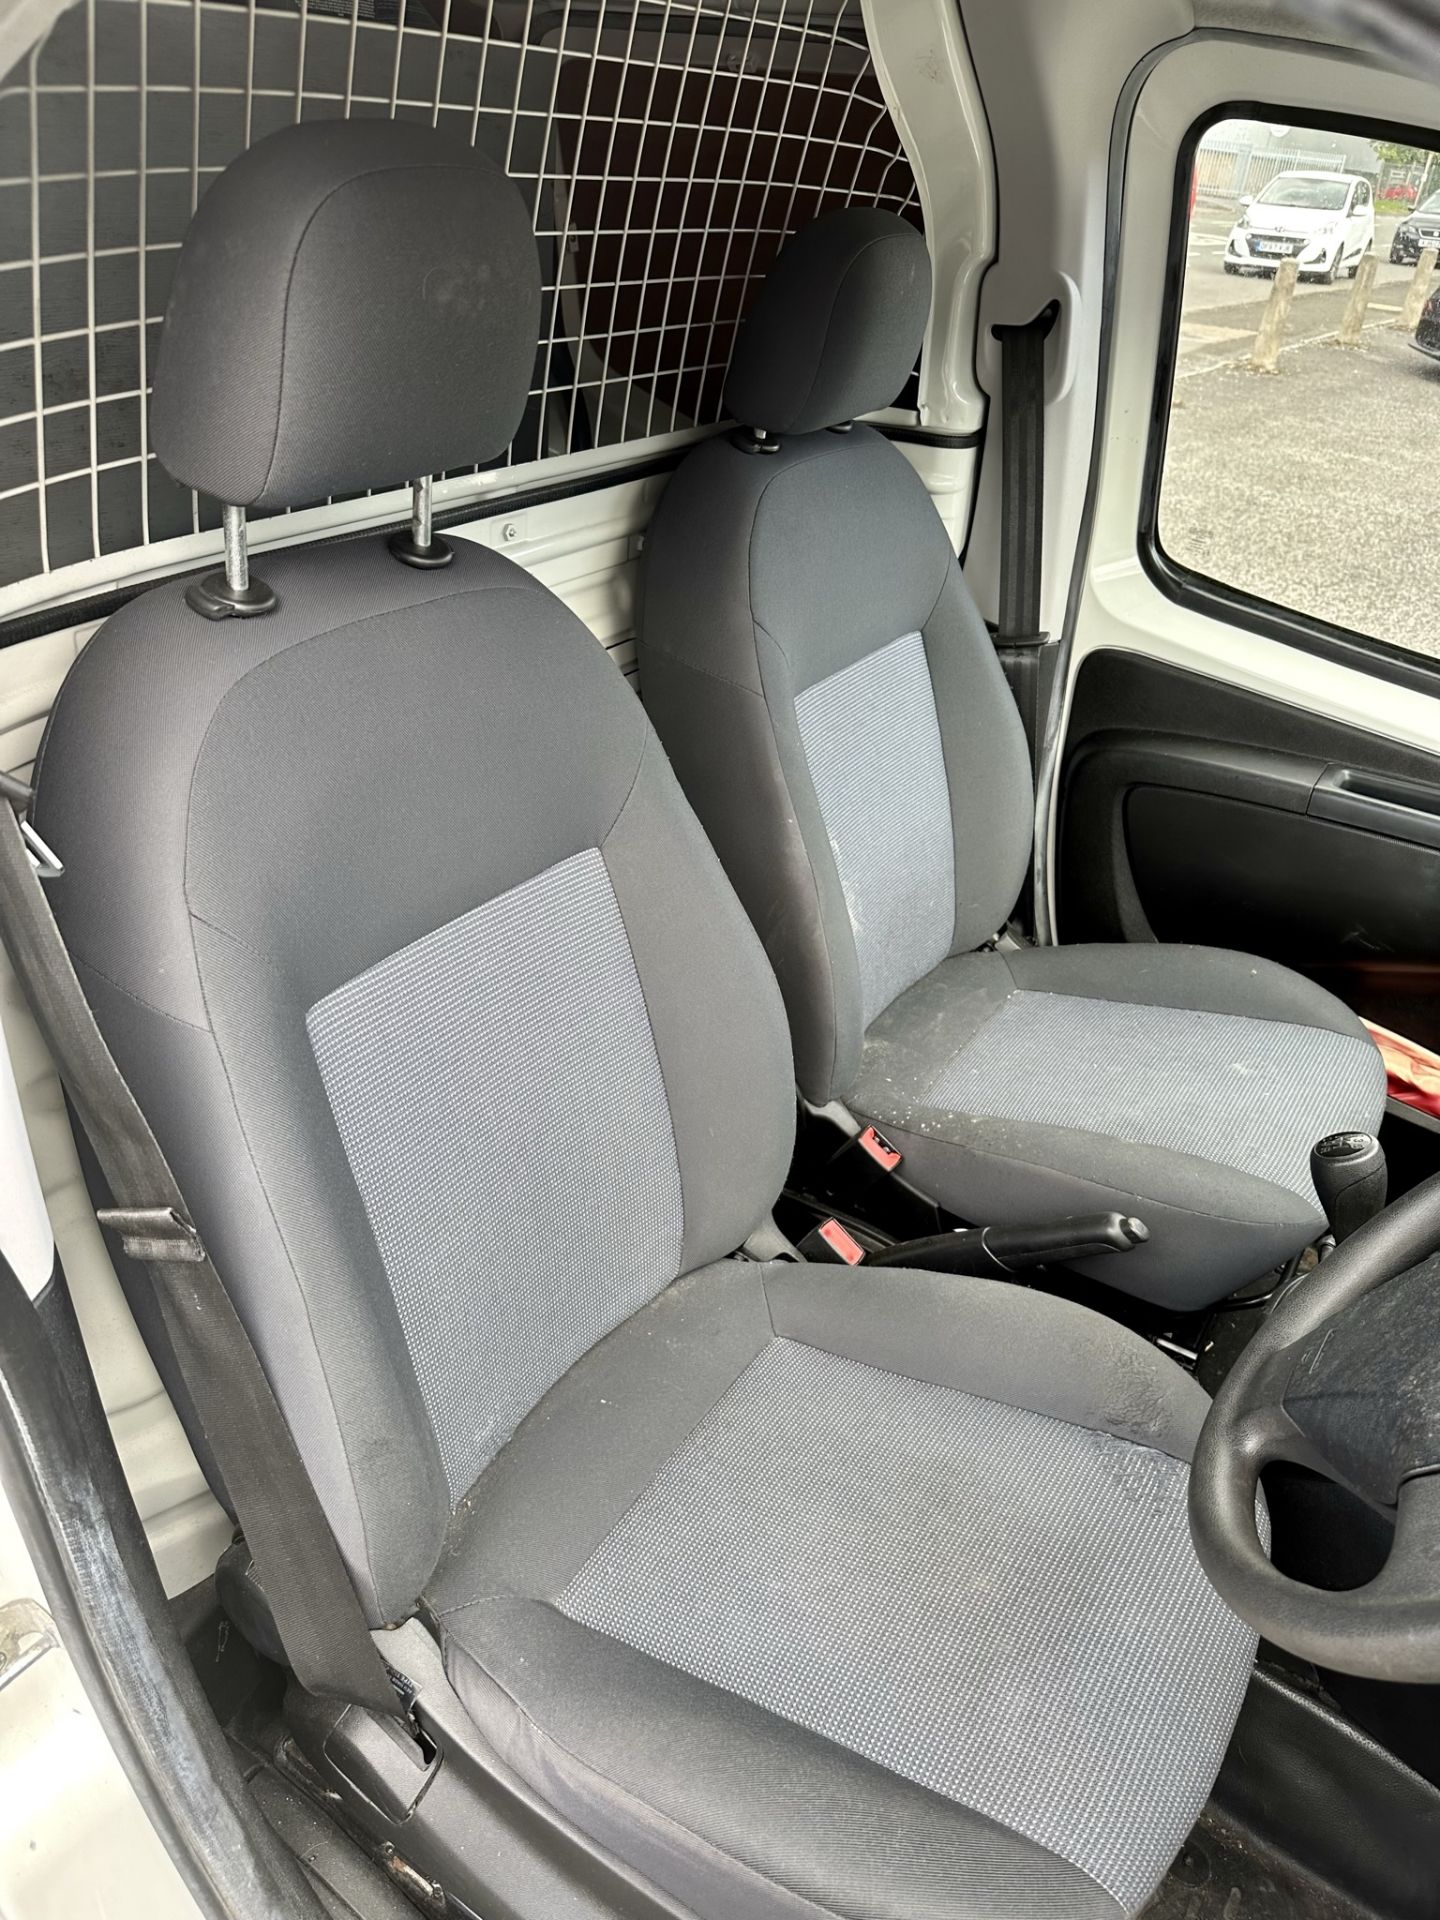 Peugeot Bipper Panel Van | NV65 FOD | Mileage: 53,510 | w/Built-In Cleaning Tank - see description - Image 12 of 18